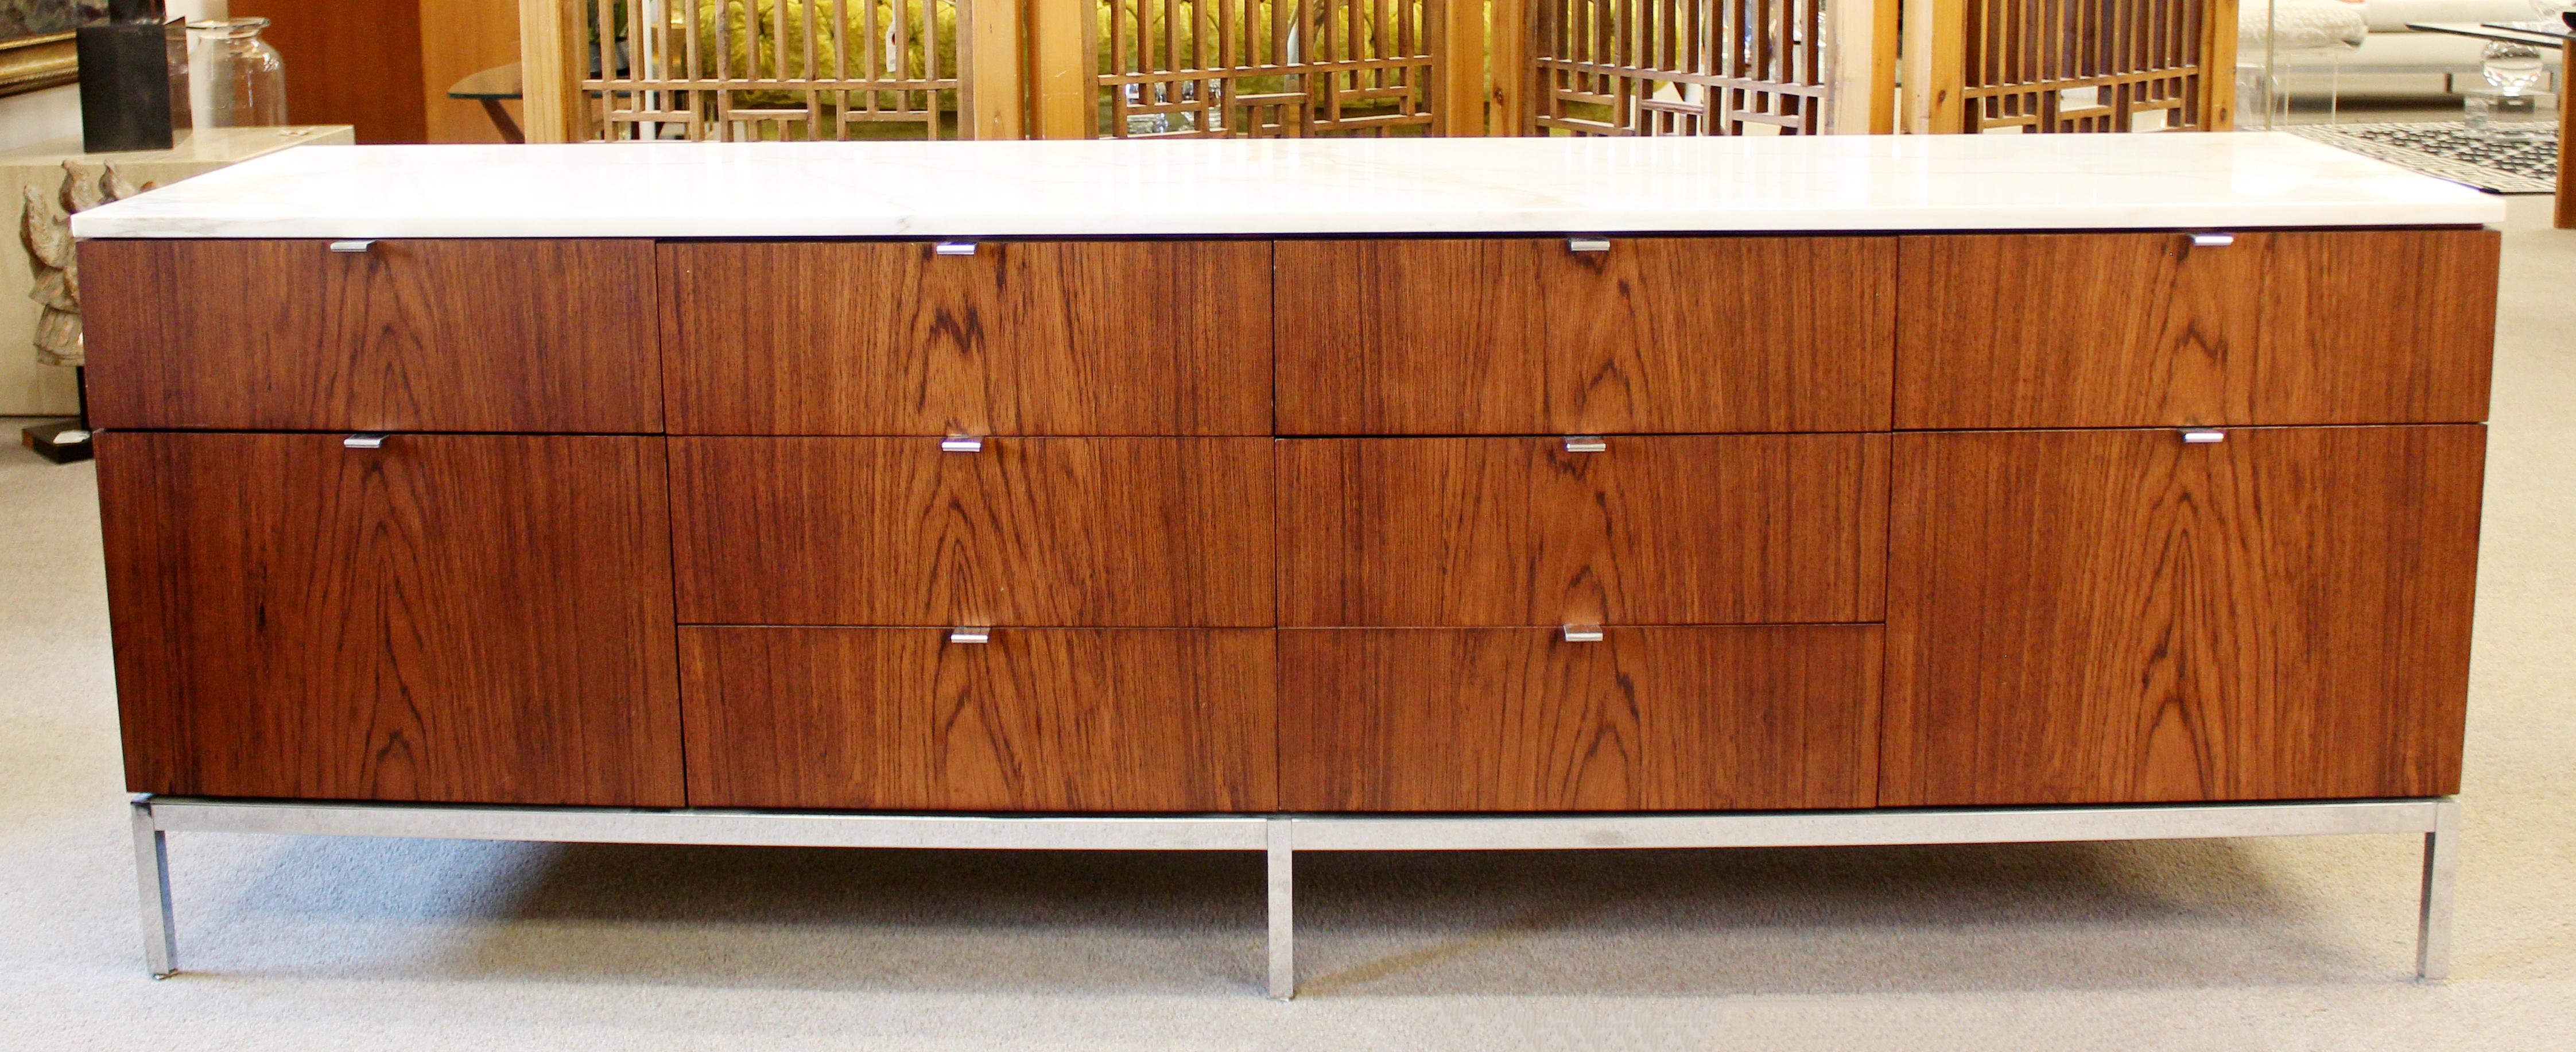 For your consideration is a ravishing, rosewood credenza, with a white marble top, and ten drawers with chrome pulls, by Florence Knoll for Knoll International, circa 1960s. In very good vintage condition. The dimensions are 74.5